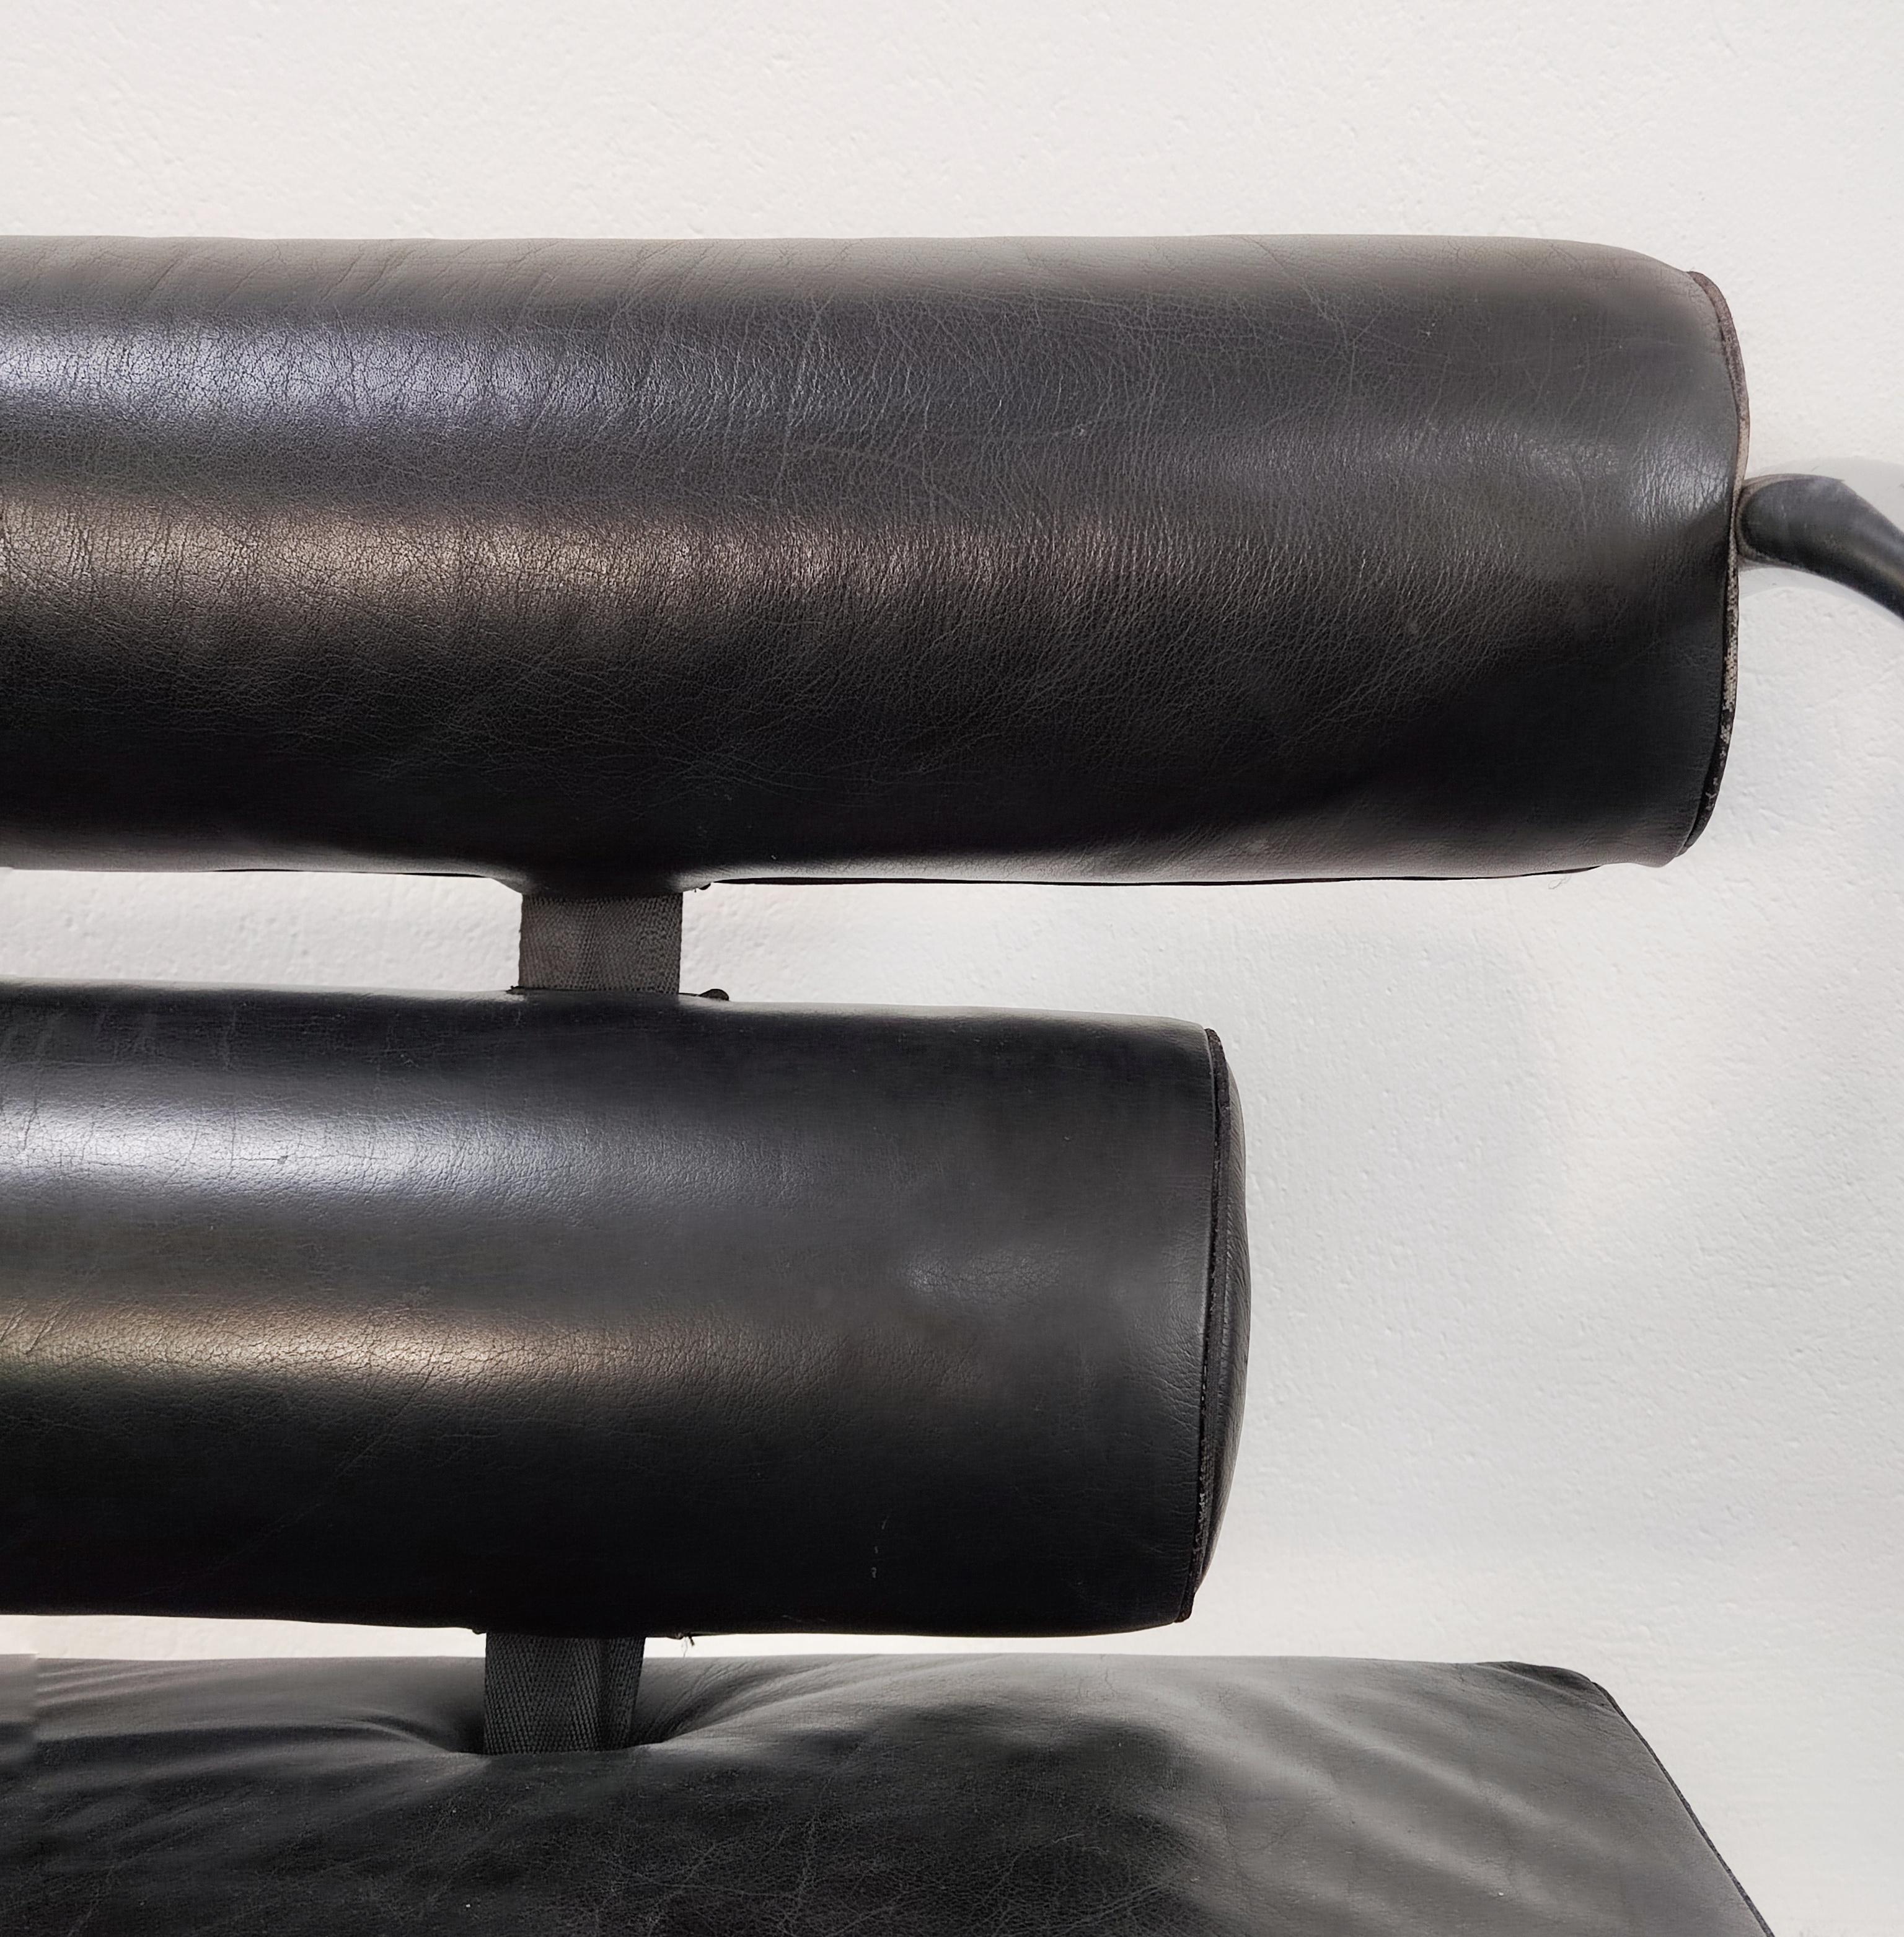 Bauhaus Style Two-Seater Leather Sofa, Switzerland 1970s For Sale 6